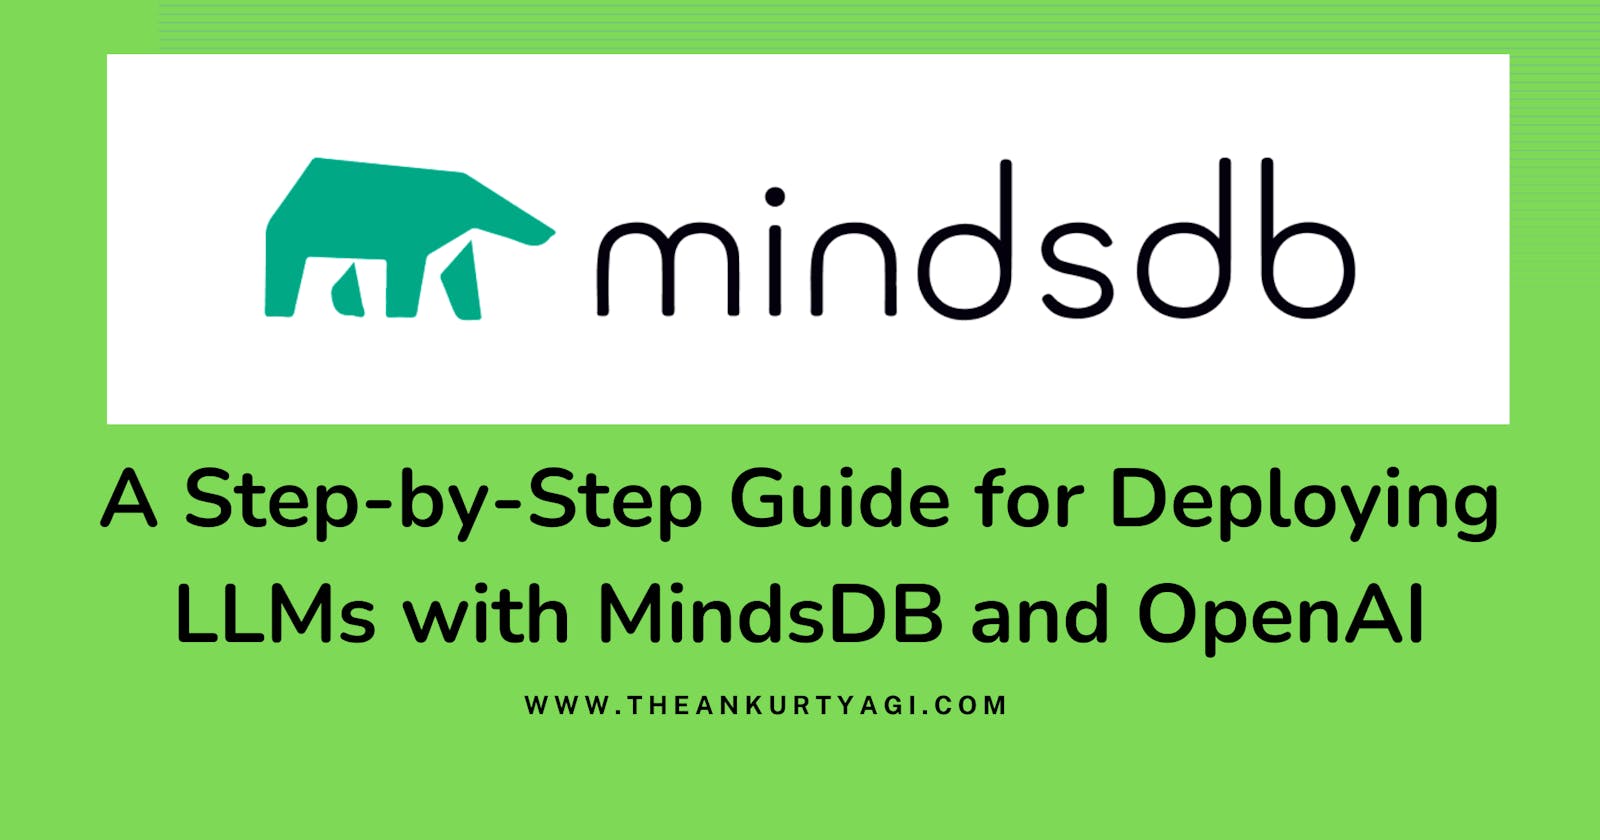 A Step-by-Step Guide for Deploying LLMs with MindsDB and OpenAI